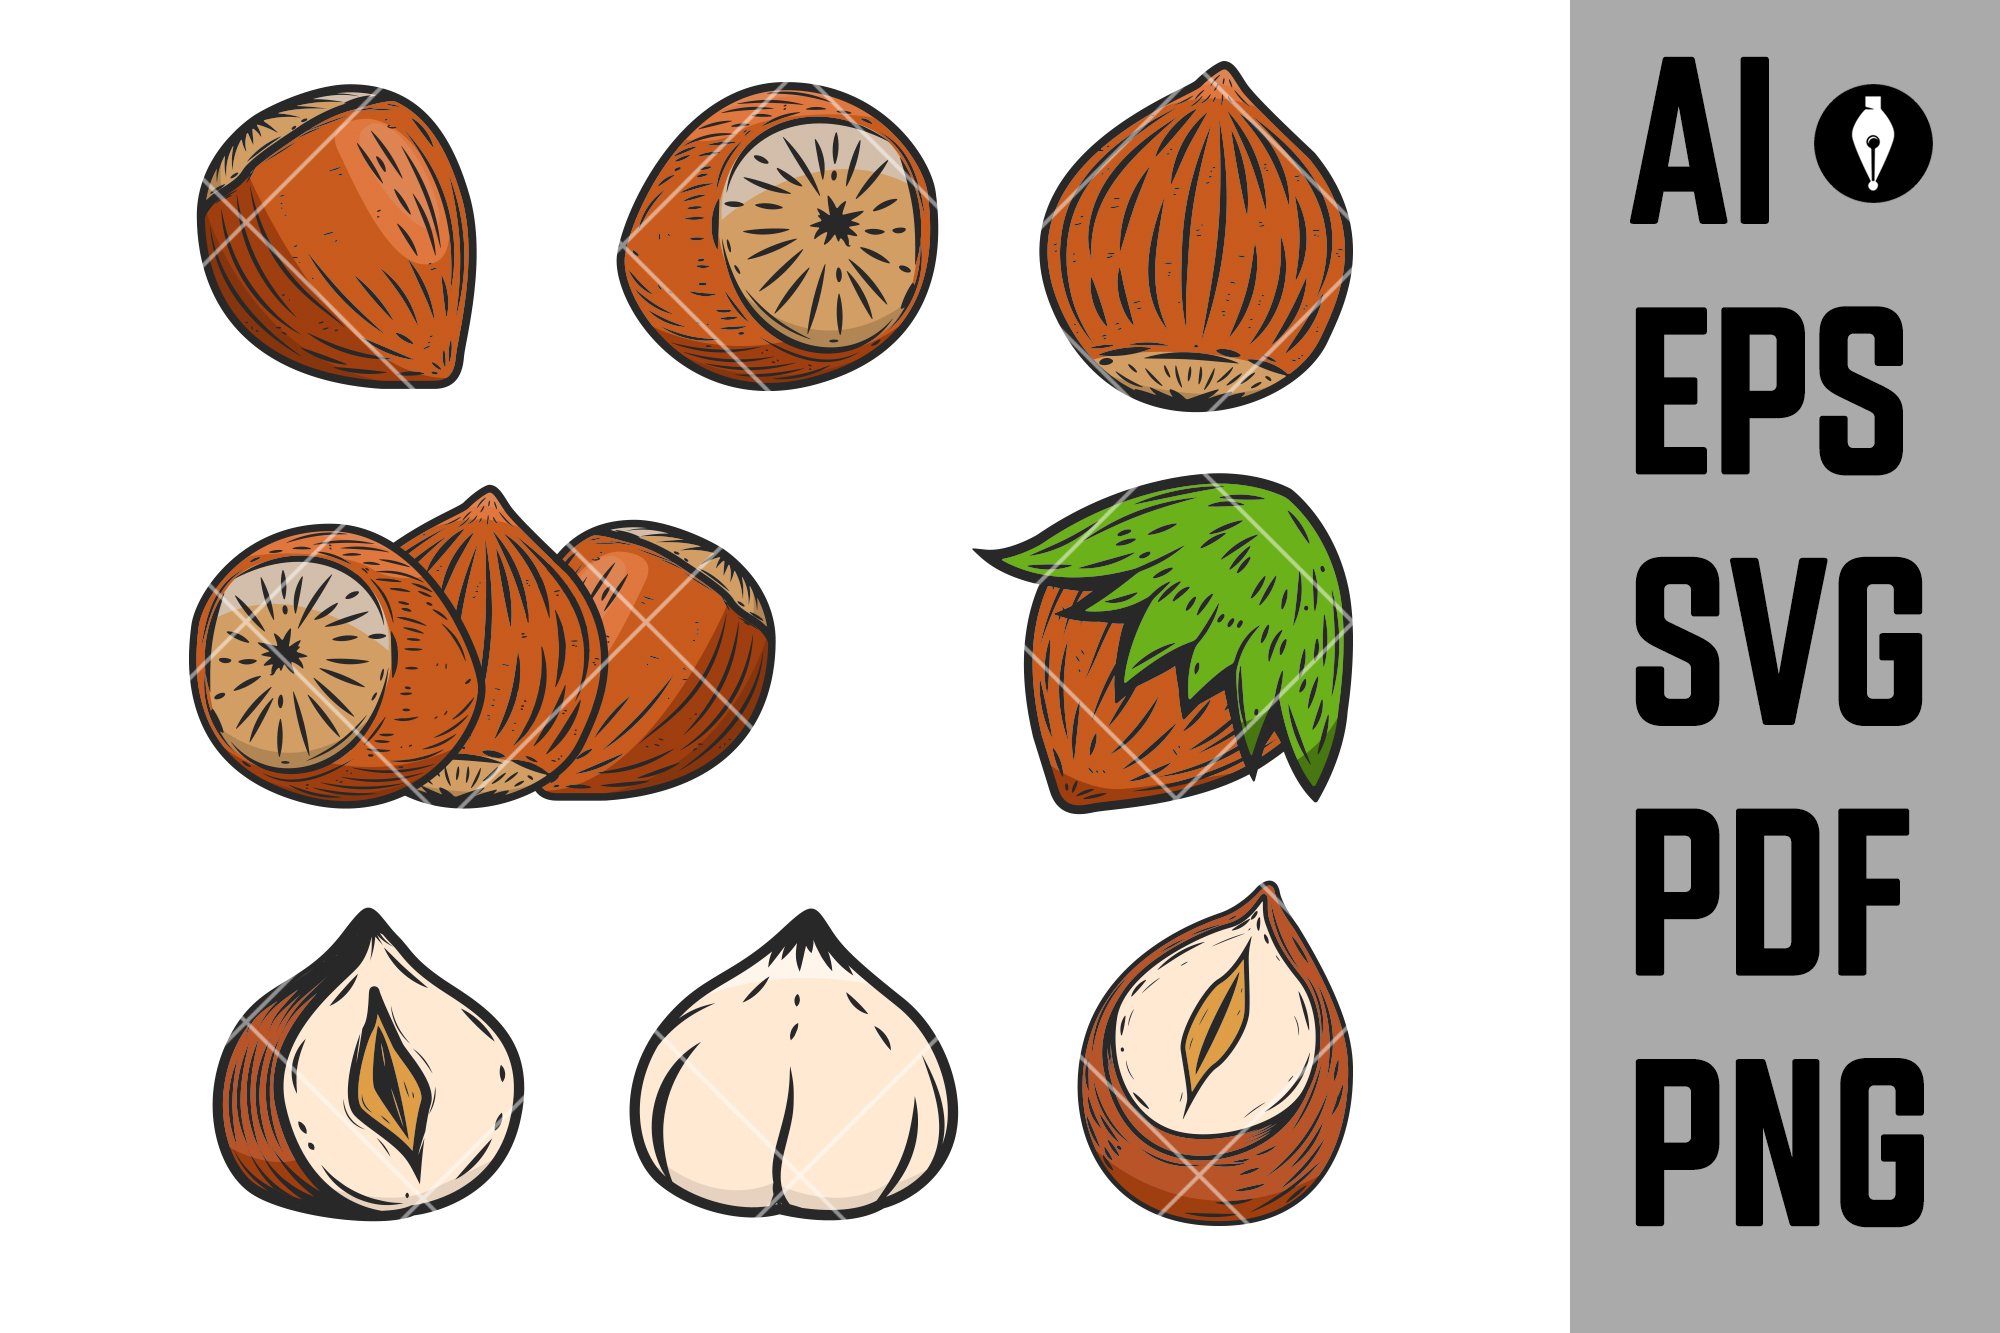 A set of 8 different illustrations of a hazelnut on a white background.